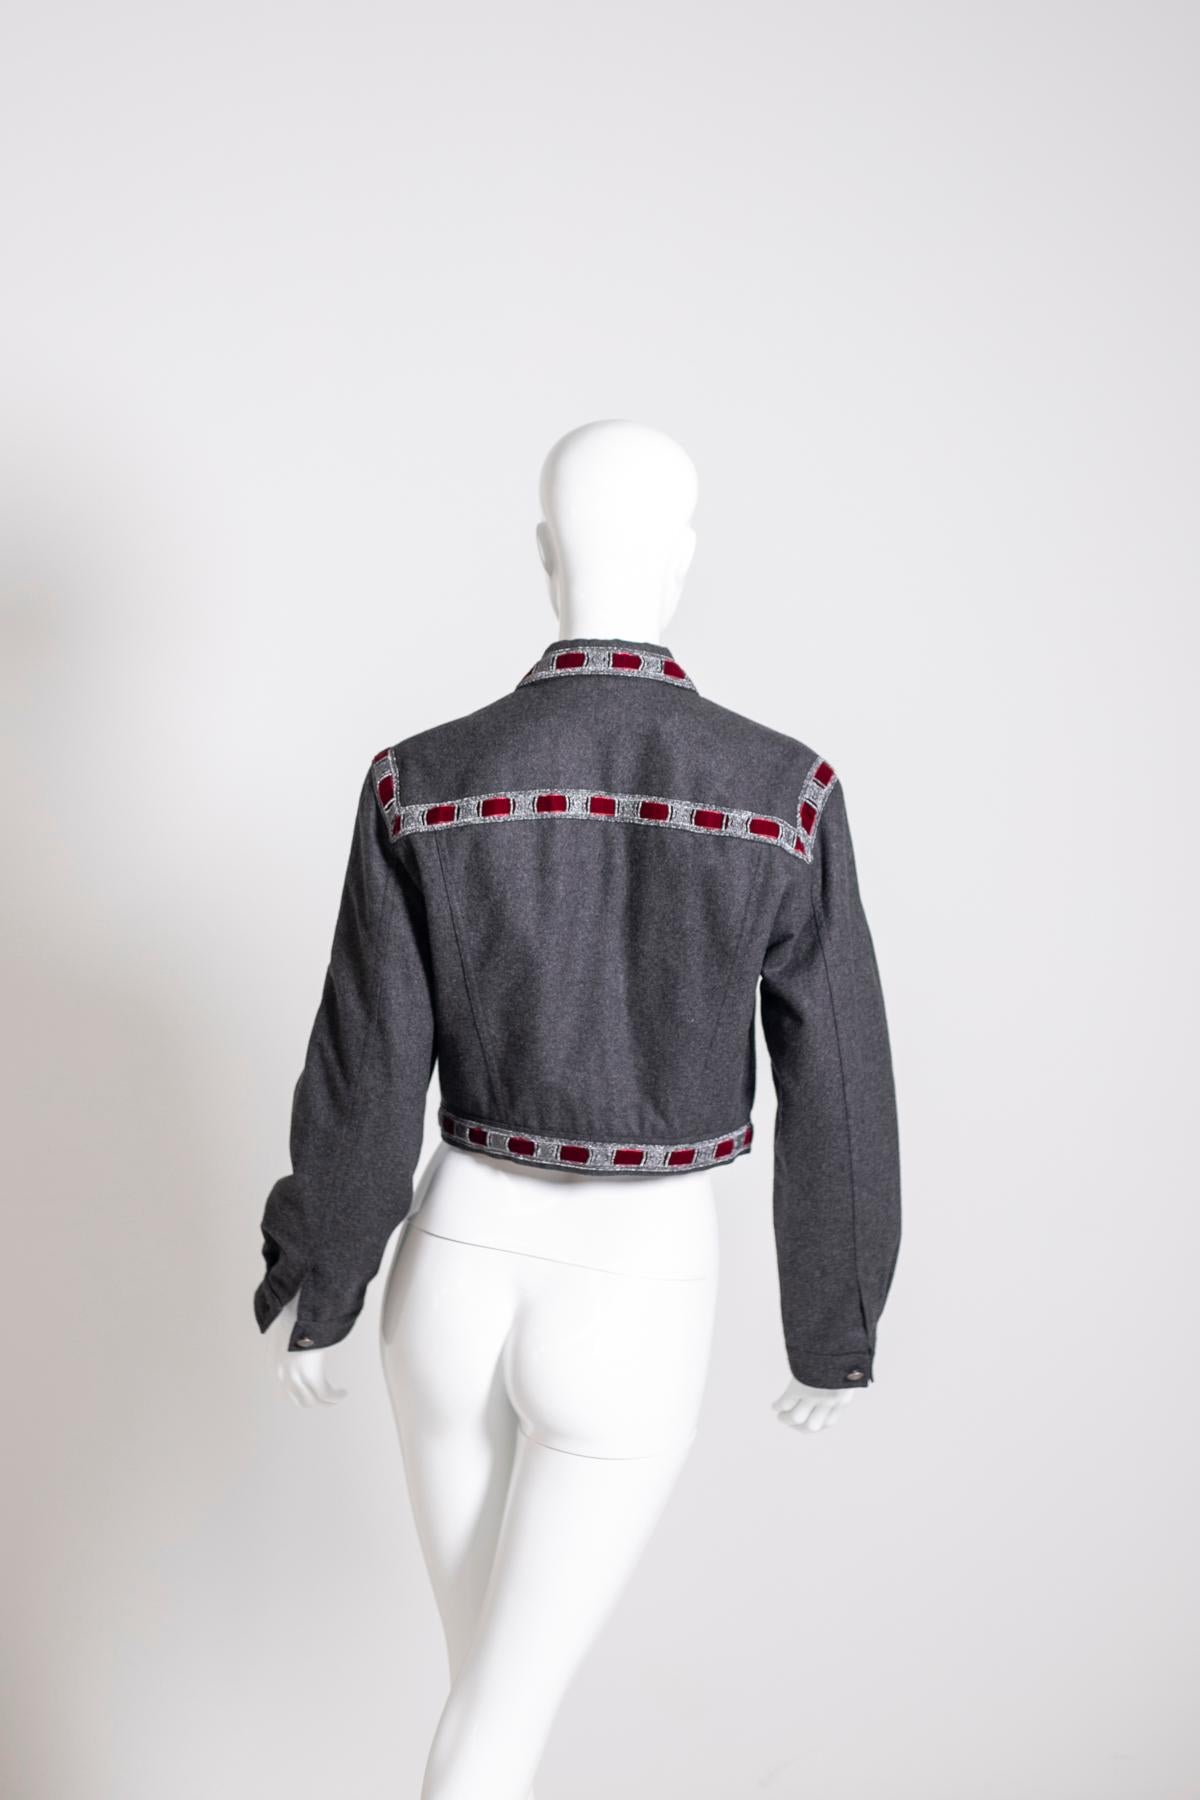 RoccoBarocco Jacket in Jeans and Red Velvet For Sale 7